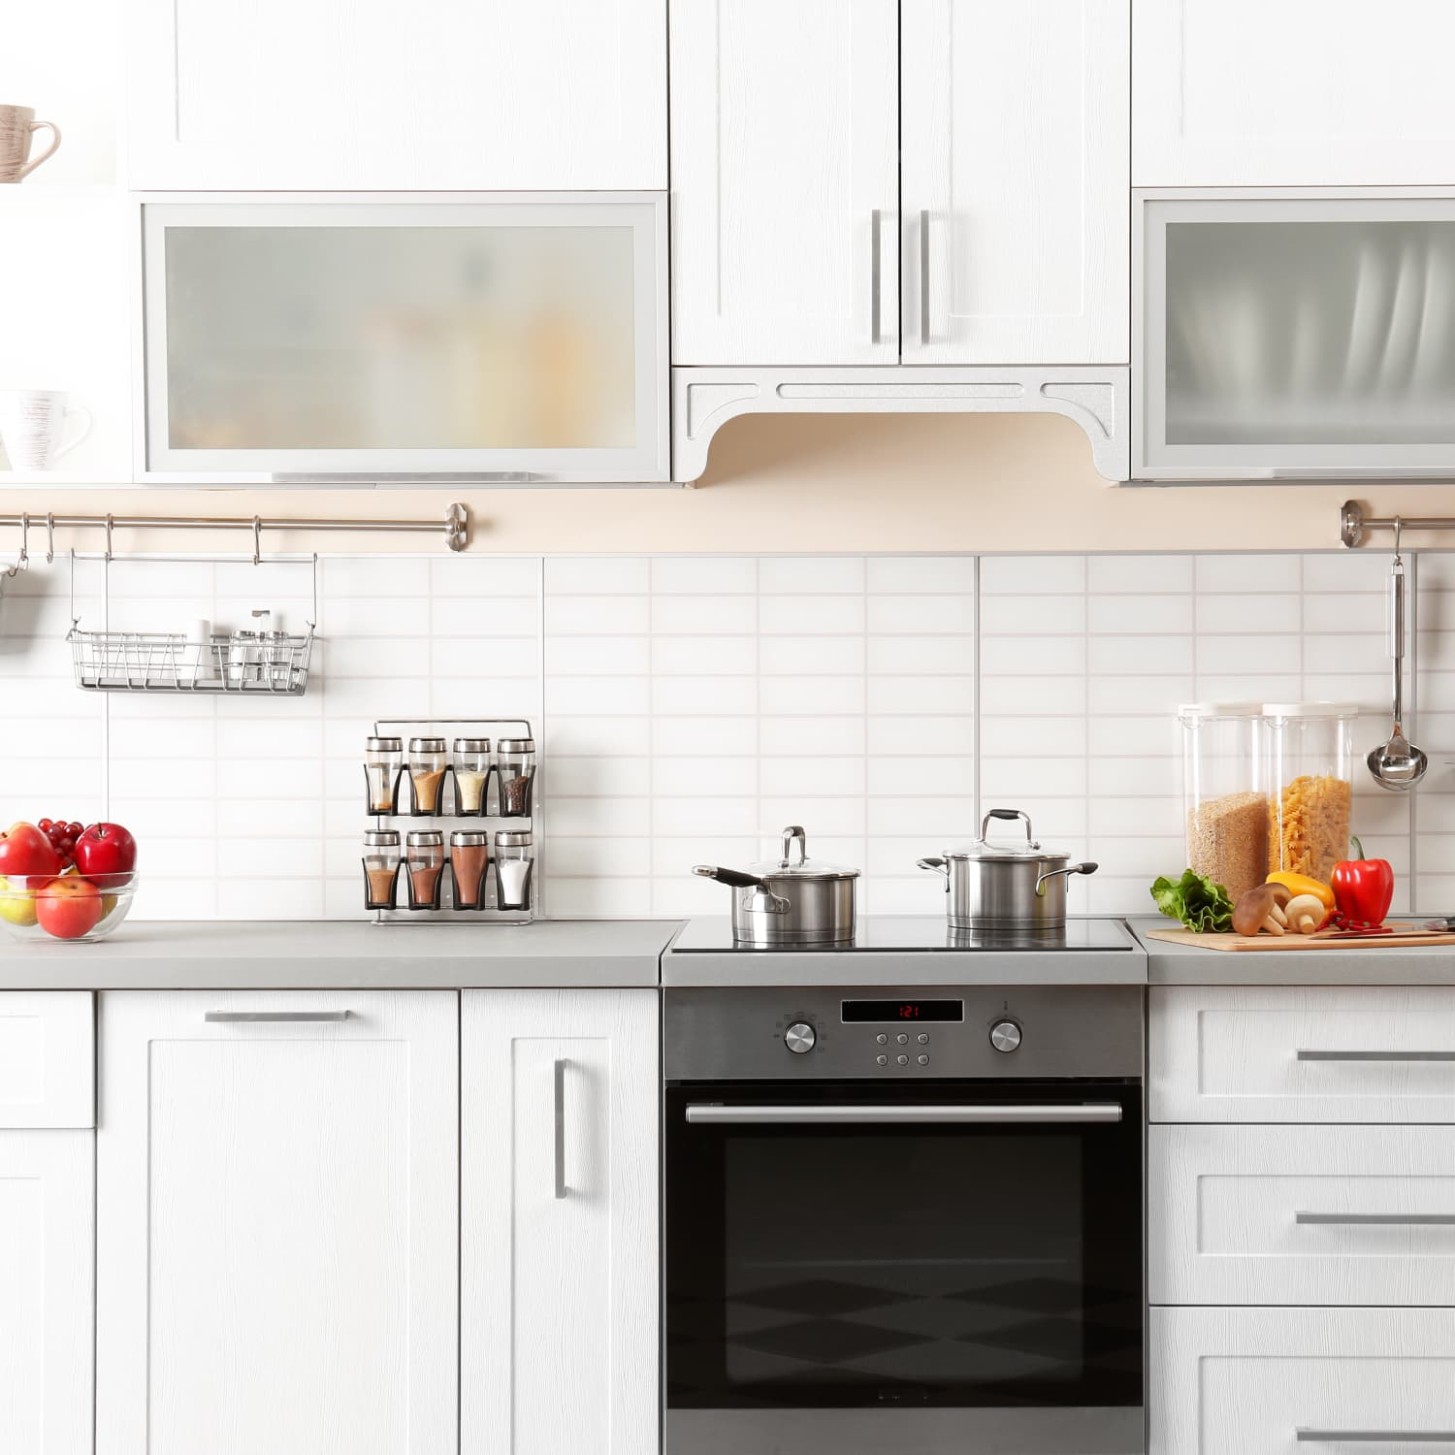 White Kitchens Are Out for 4, According to These Home Pros  - white kitchens 2022